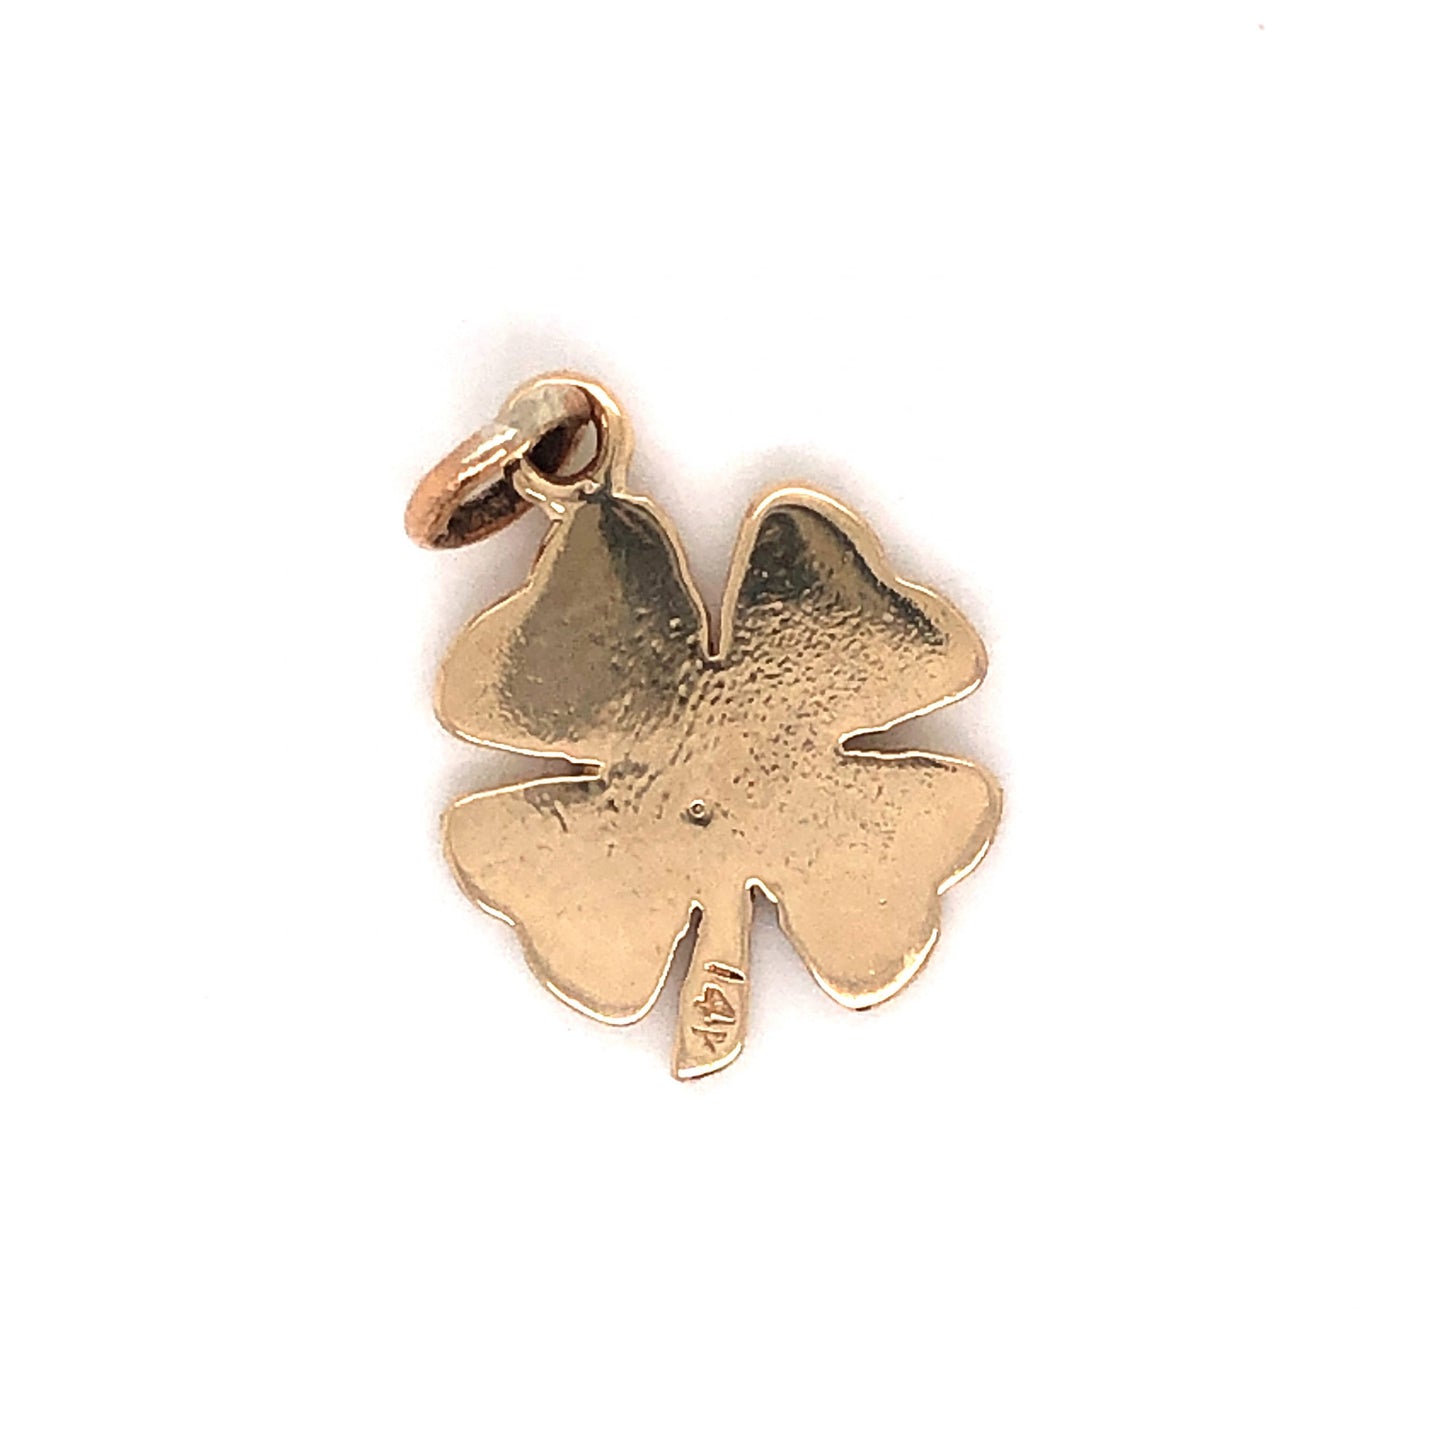 Four Leaf Clover Charm Pendant in 14k Yellow Gold